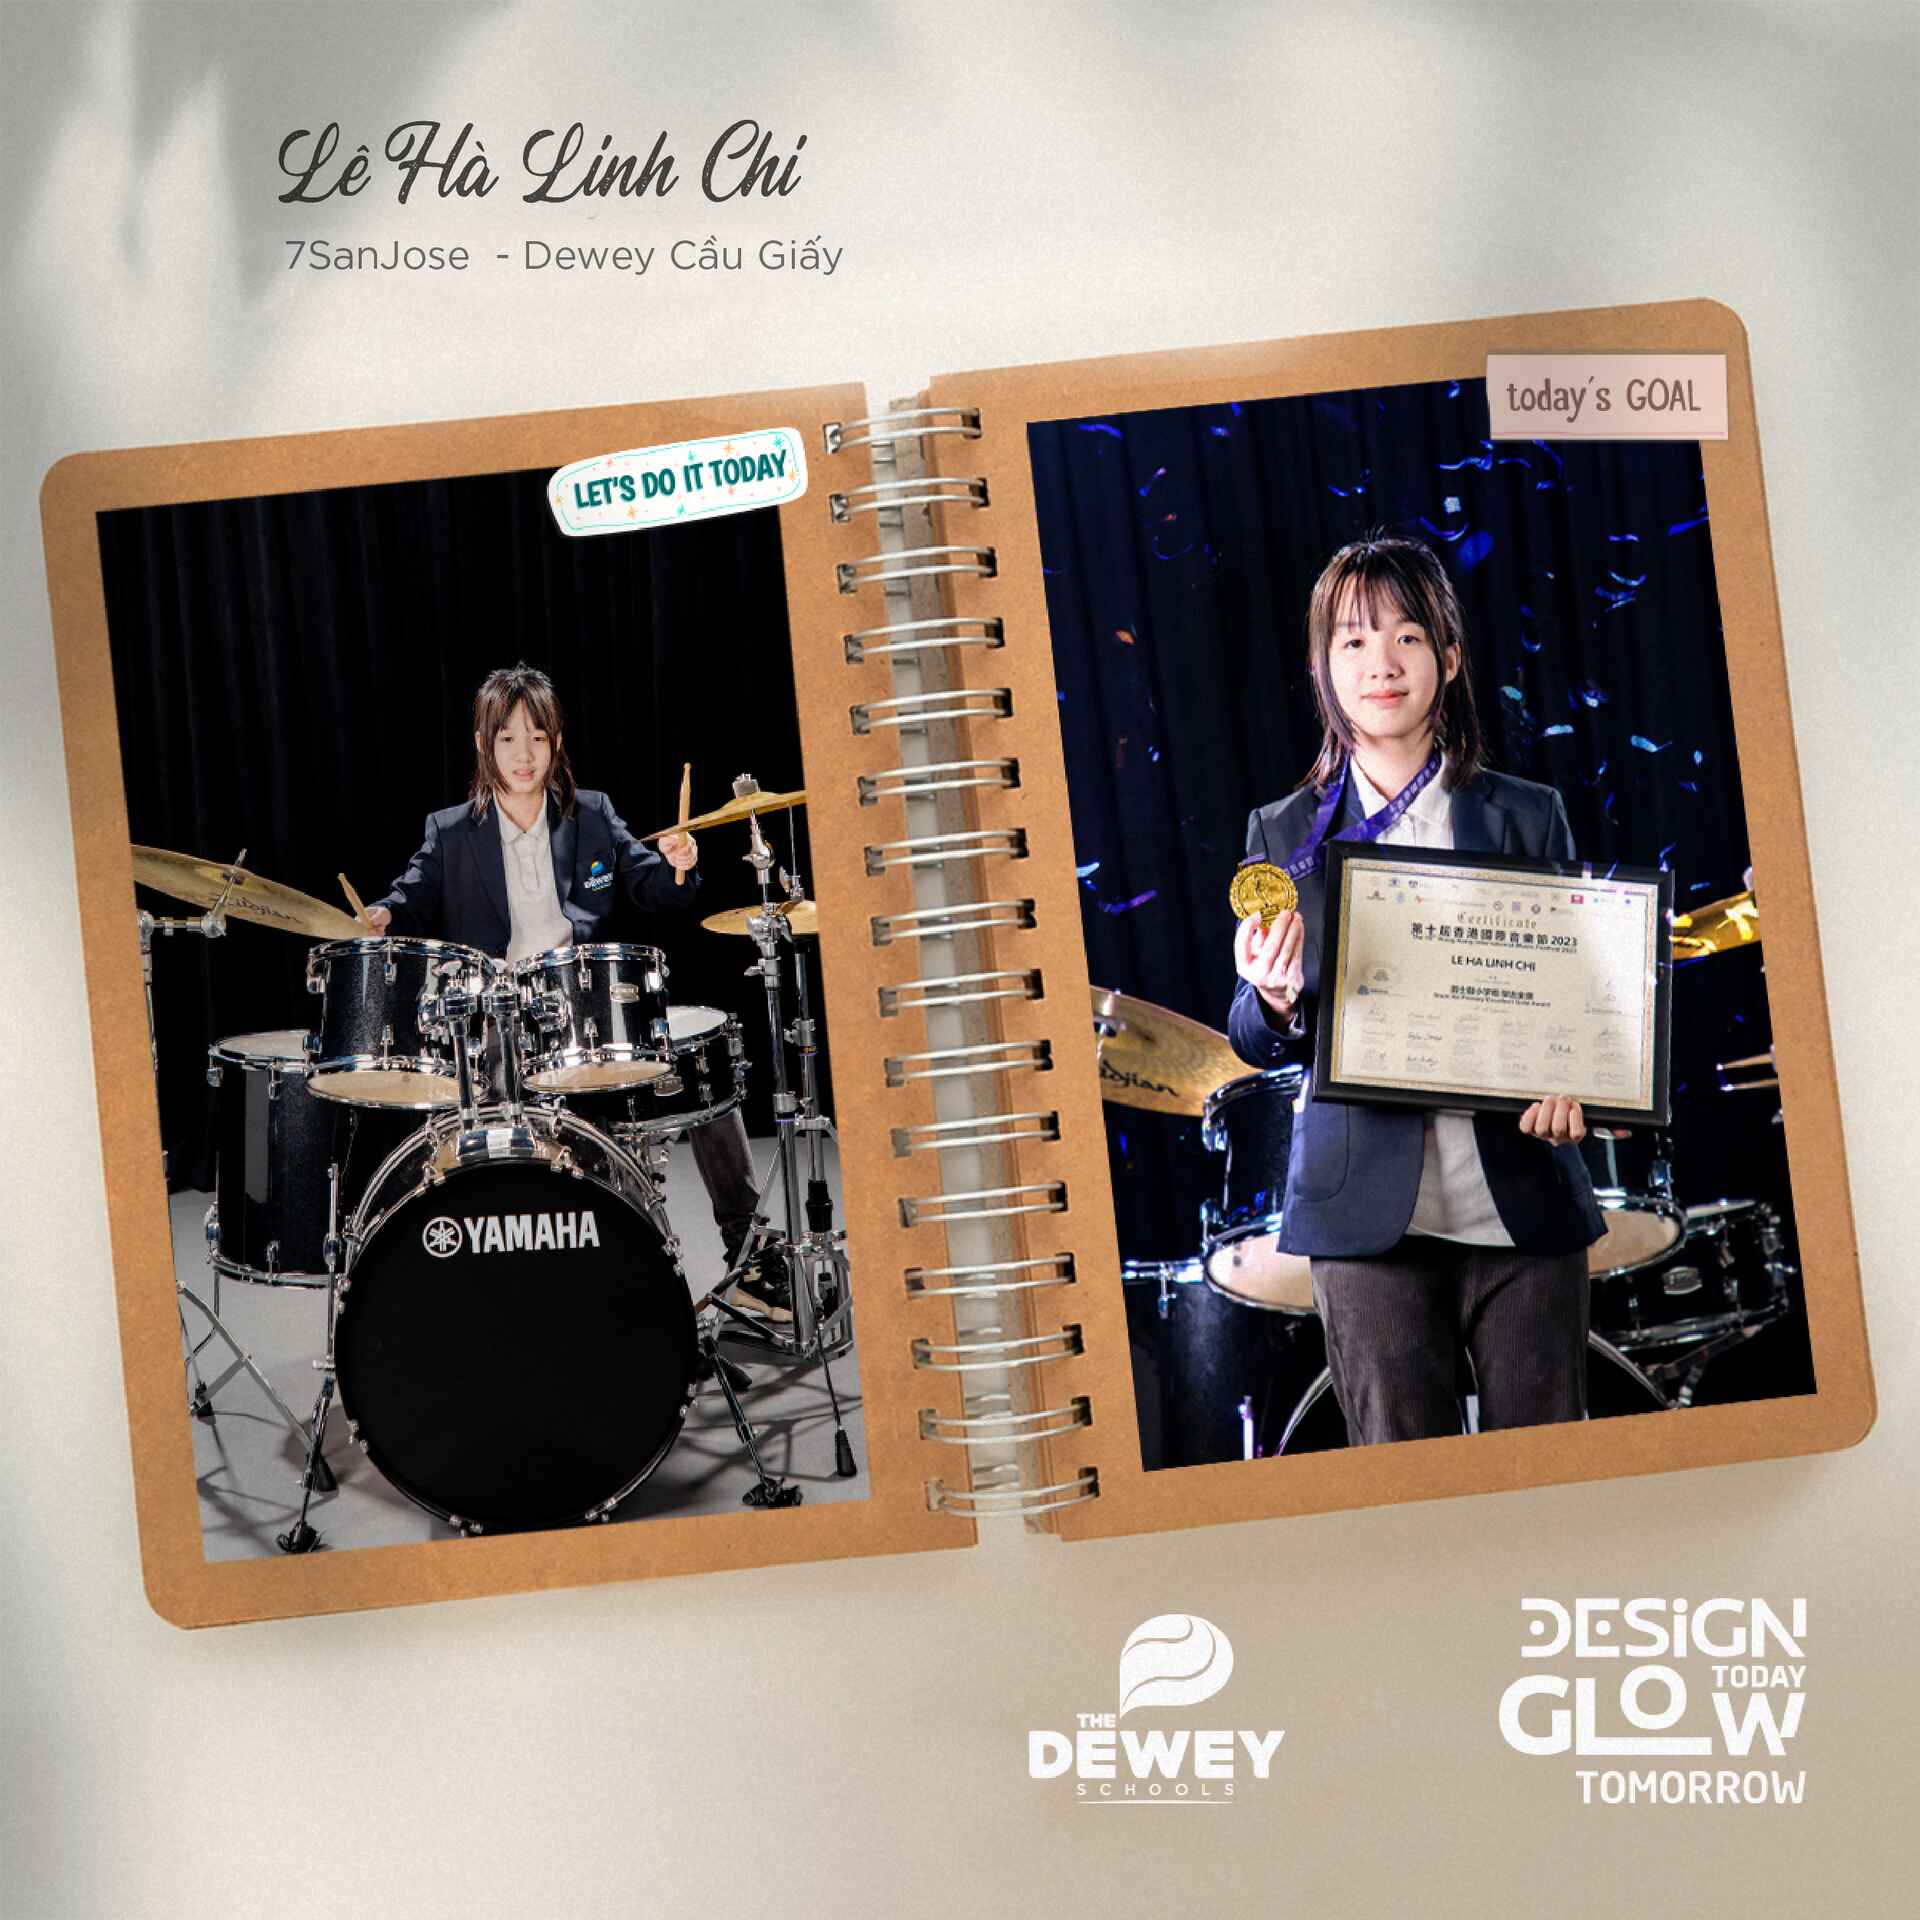 glow-up-le-ha-linh-chi-cover